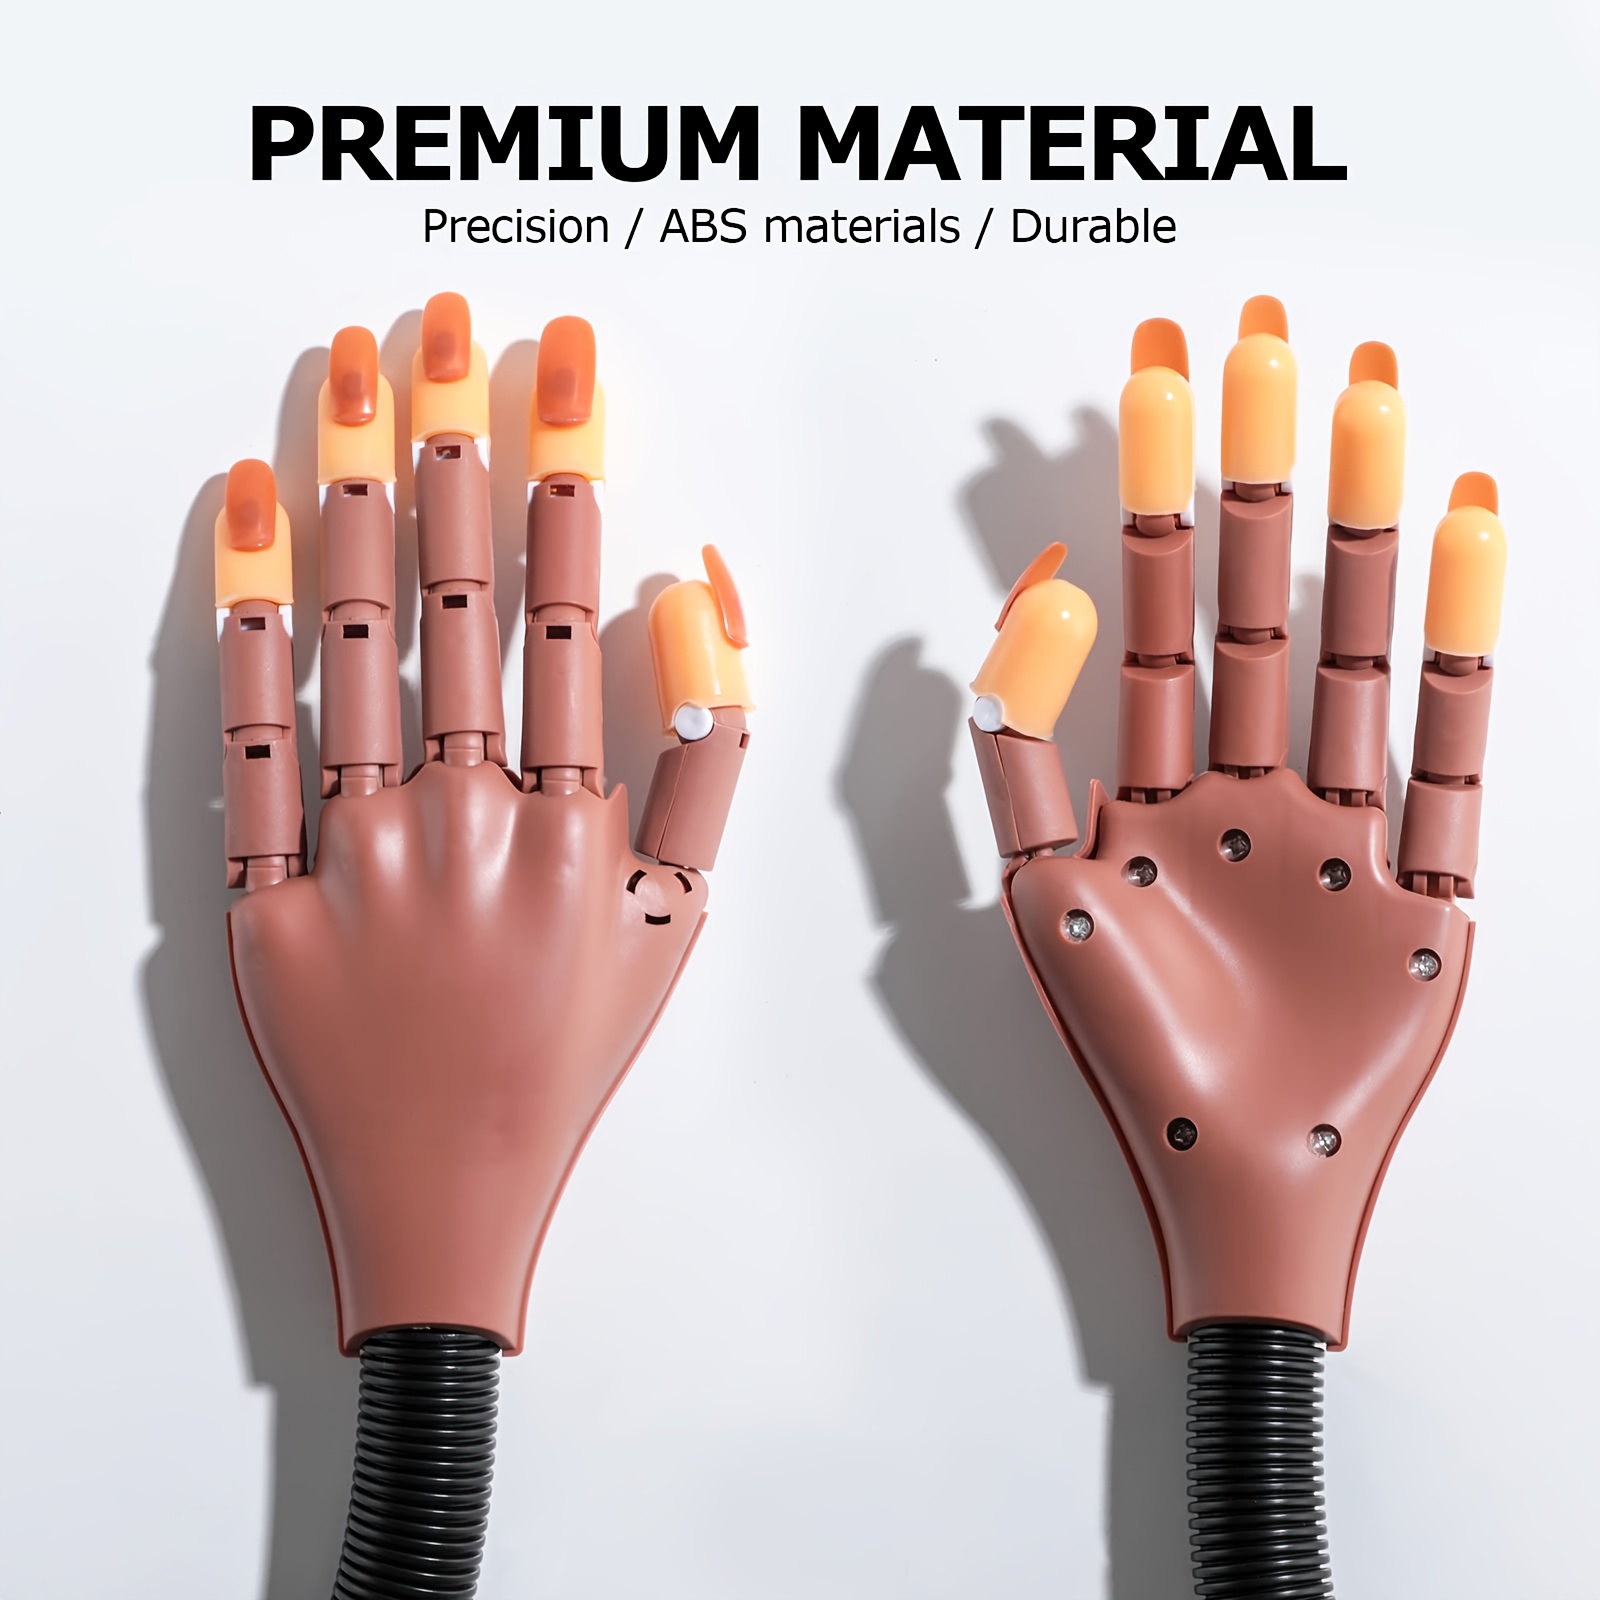 Flexible Practice Hand For Acrylic Nails Movable - Temu